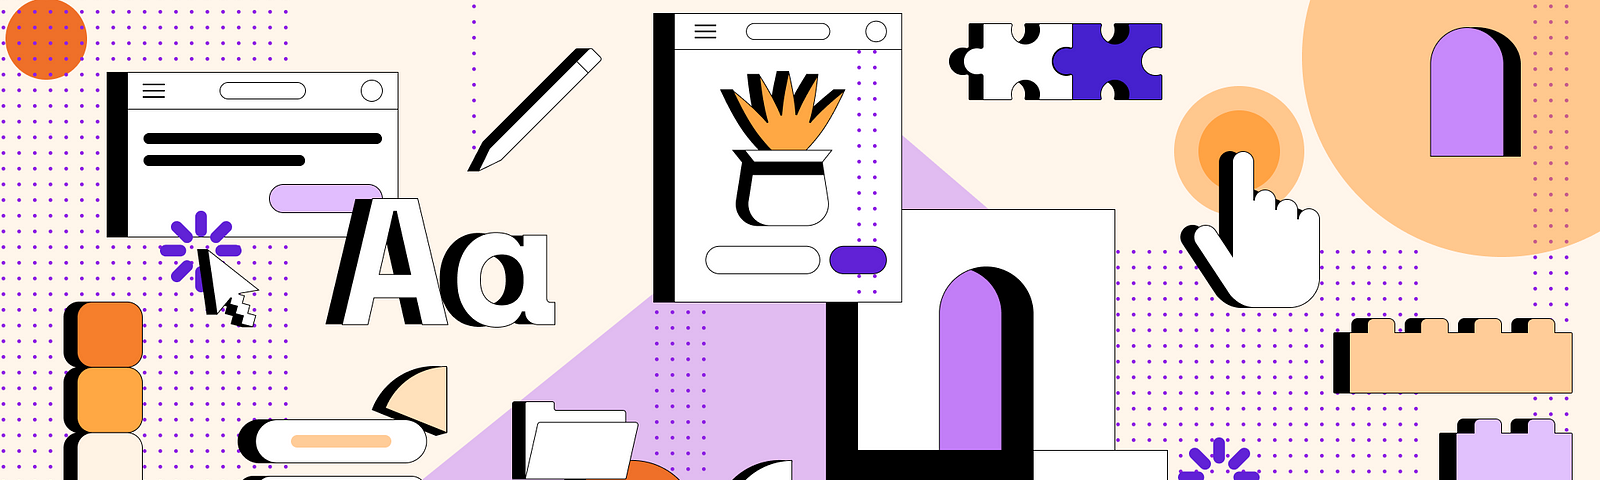 A colorful illustration with some scattered elements that relate to digital products, such as a file icon, a mouse pointer, an edit icon, a few buttons, etc.